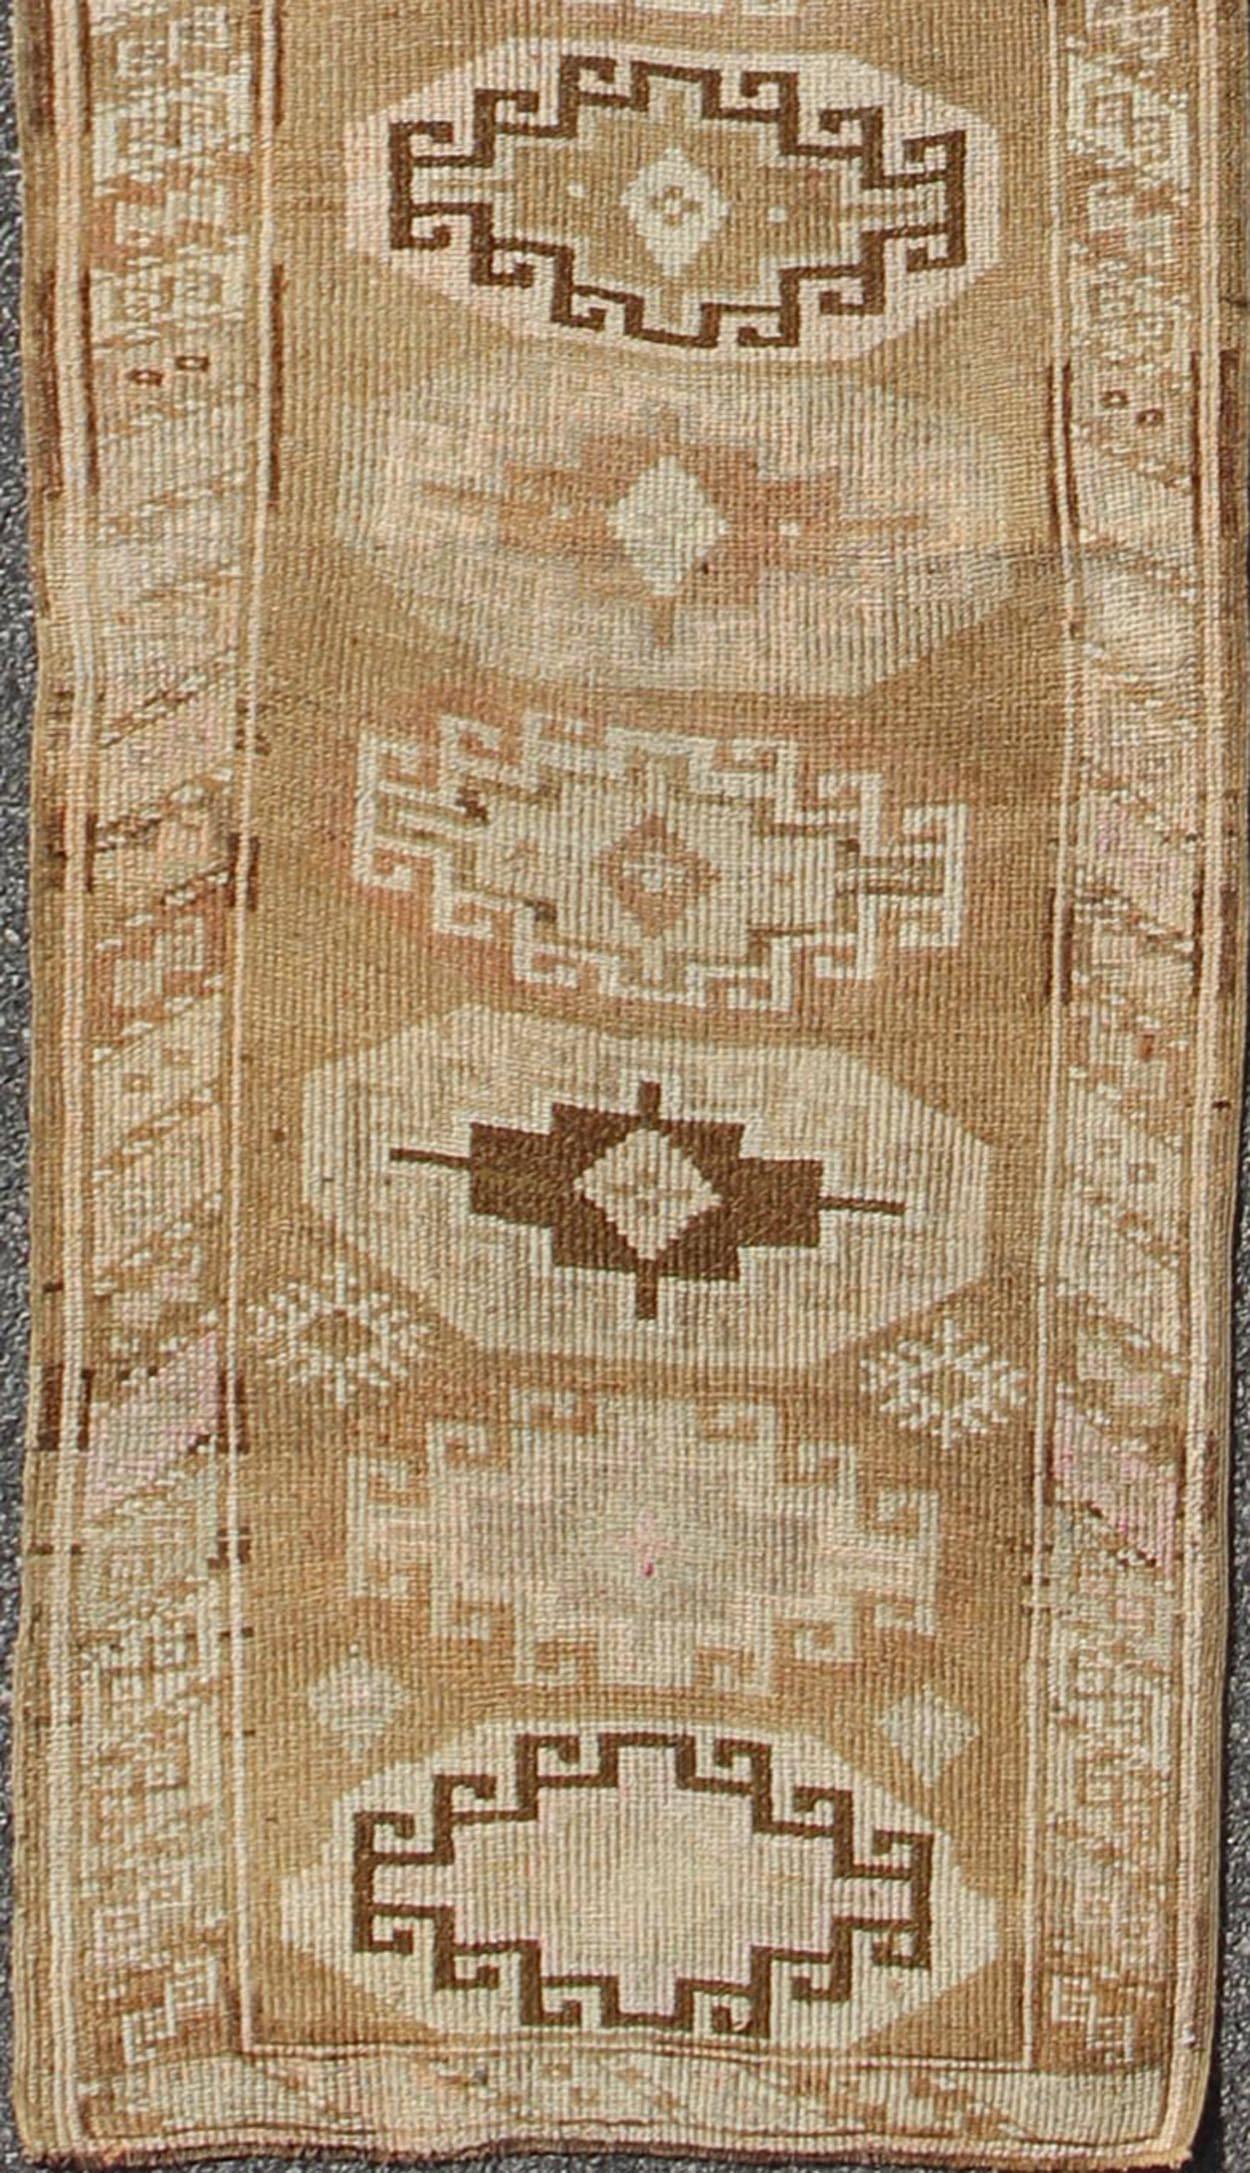 Long vintage Turkish runner with taupe, cream, brown stacked medallions, rug tu-trs-136522, country of origin / type: Turkey / Oushak, circa 1930

This long vintage Turkish gallery rug (circa 1930) features a unique blend of colors and an